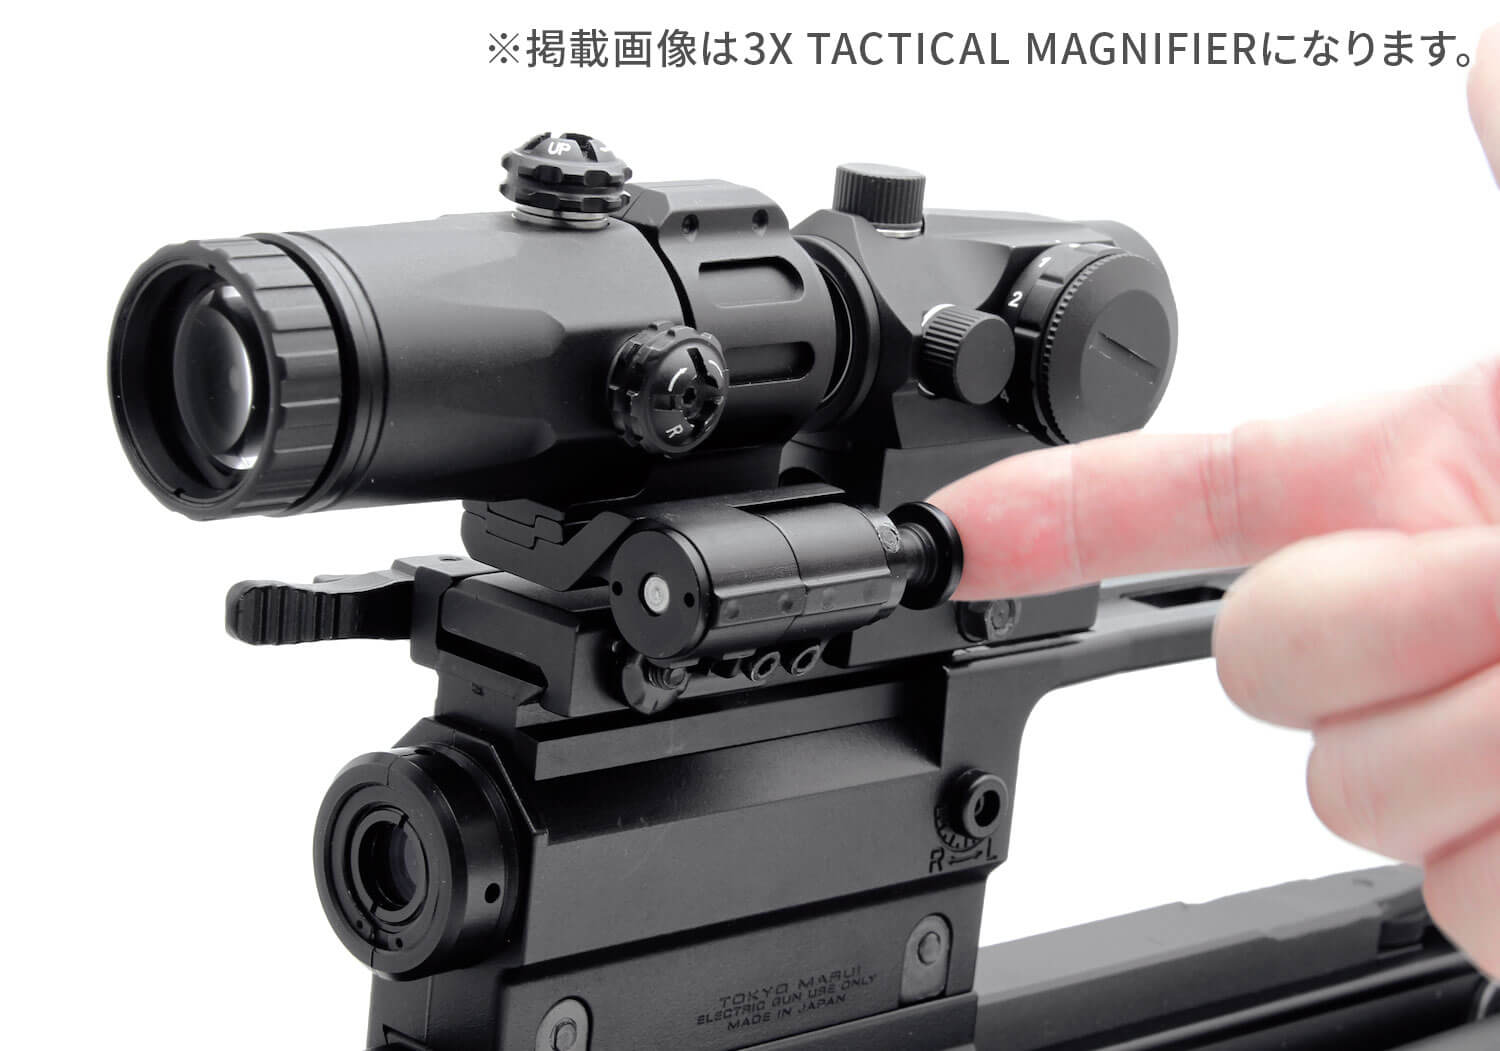 AIRSOFT97 沖縄本店 通販部 / NOVEL ARMS 5X TACTICAL MAGNIFIER